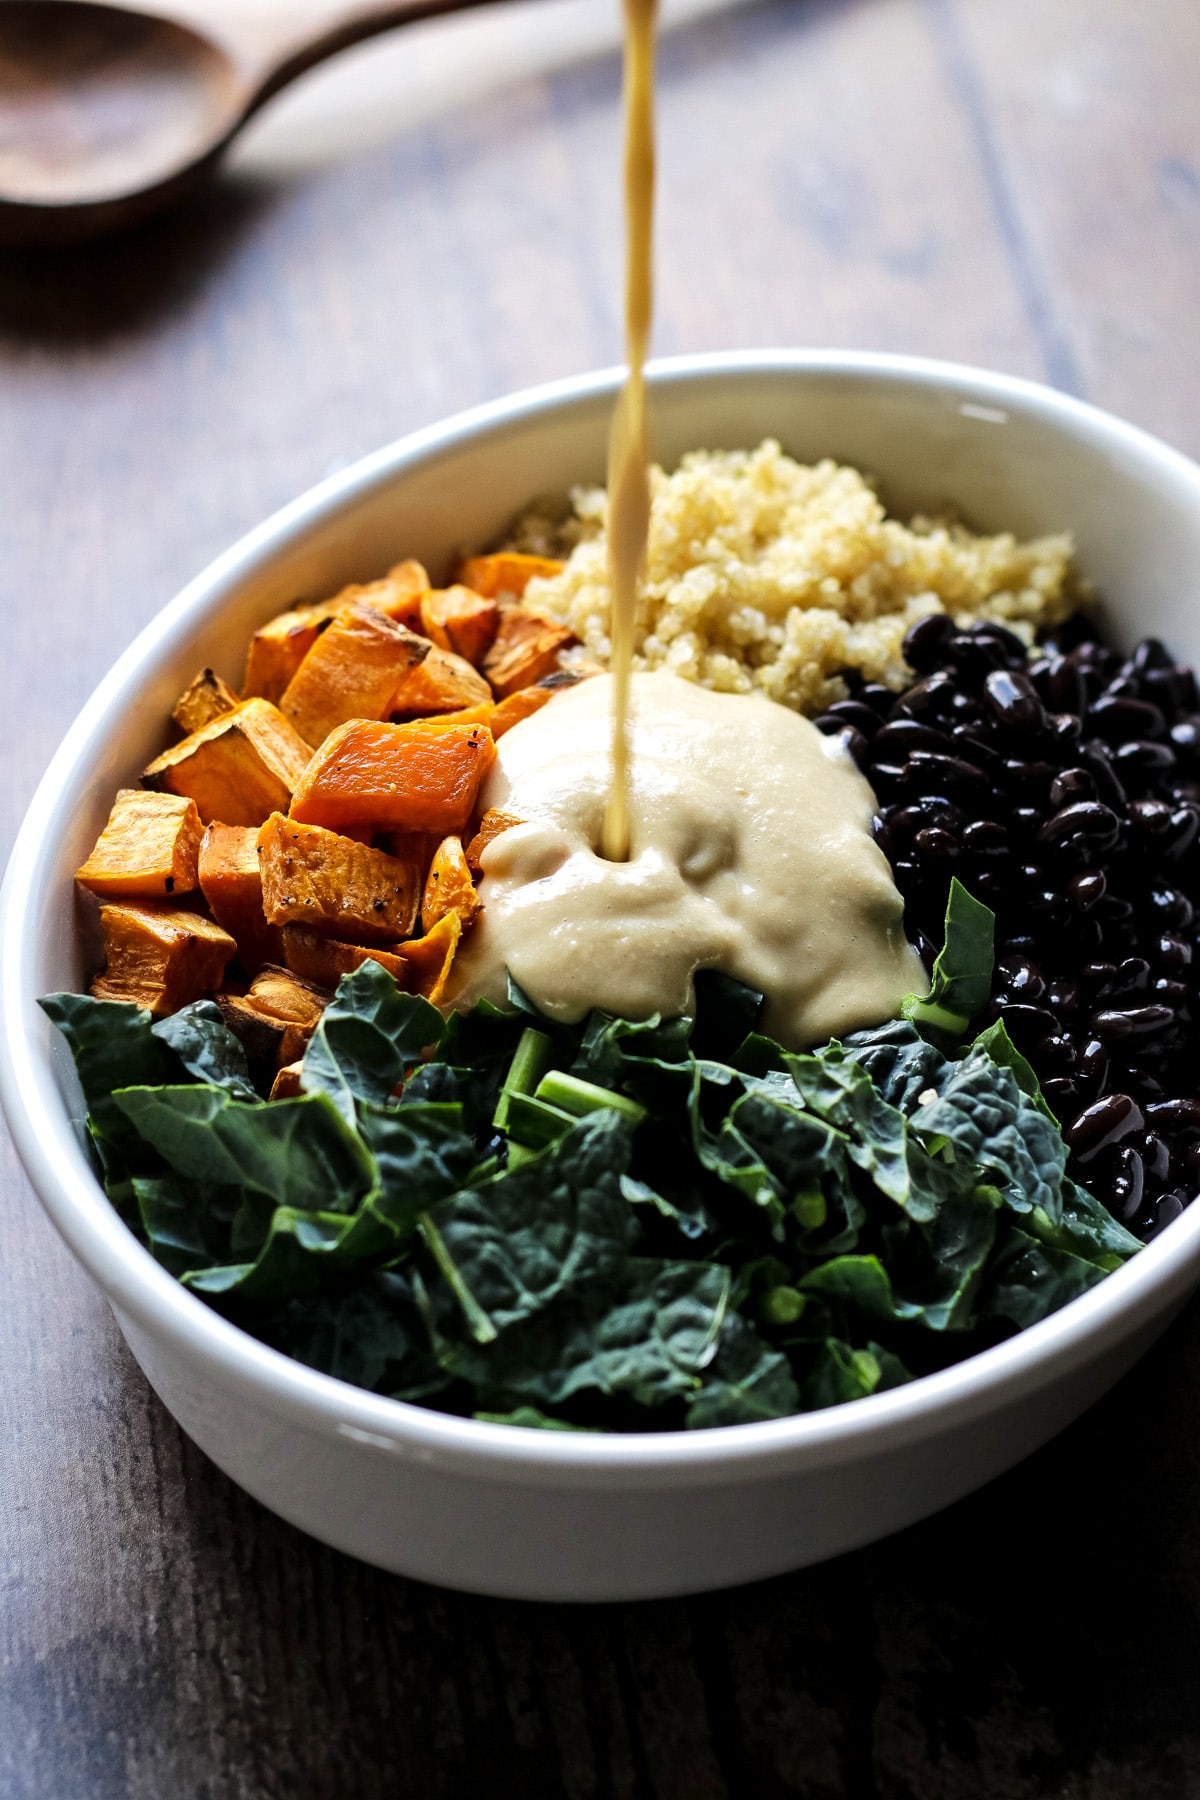 Sweet Potato Casserole with Black Beans, Kale and Quinoa | by Happy Kitchen